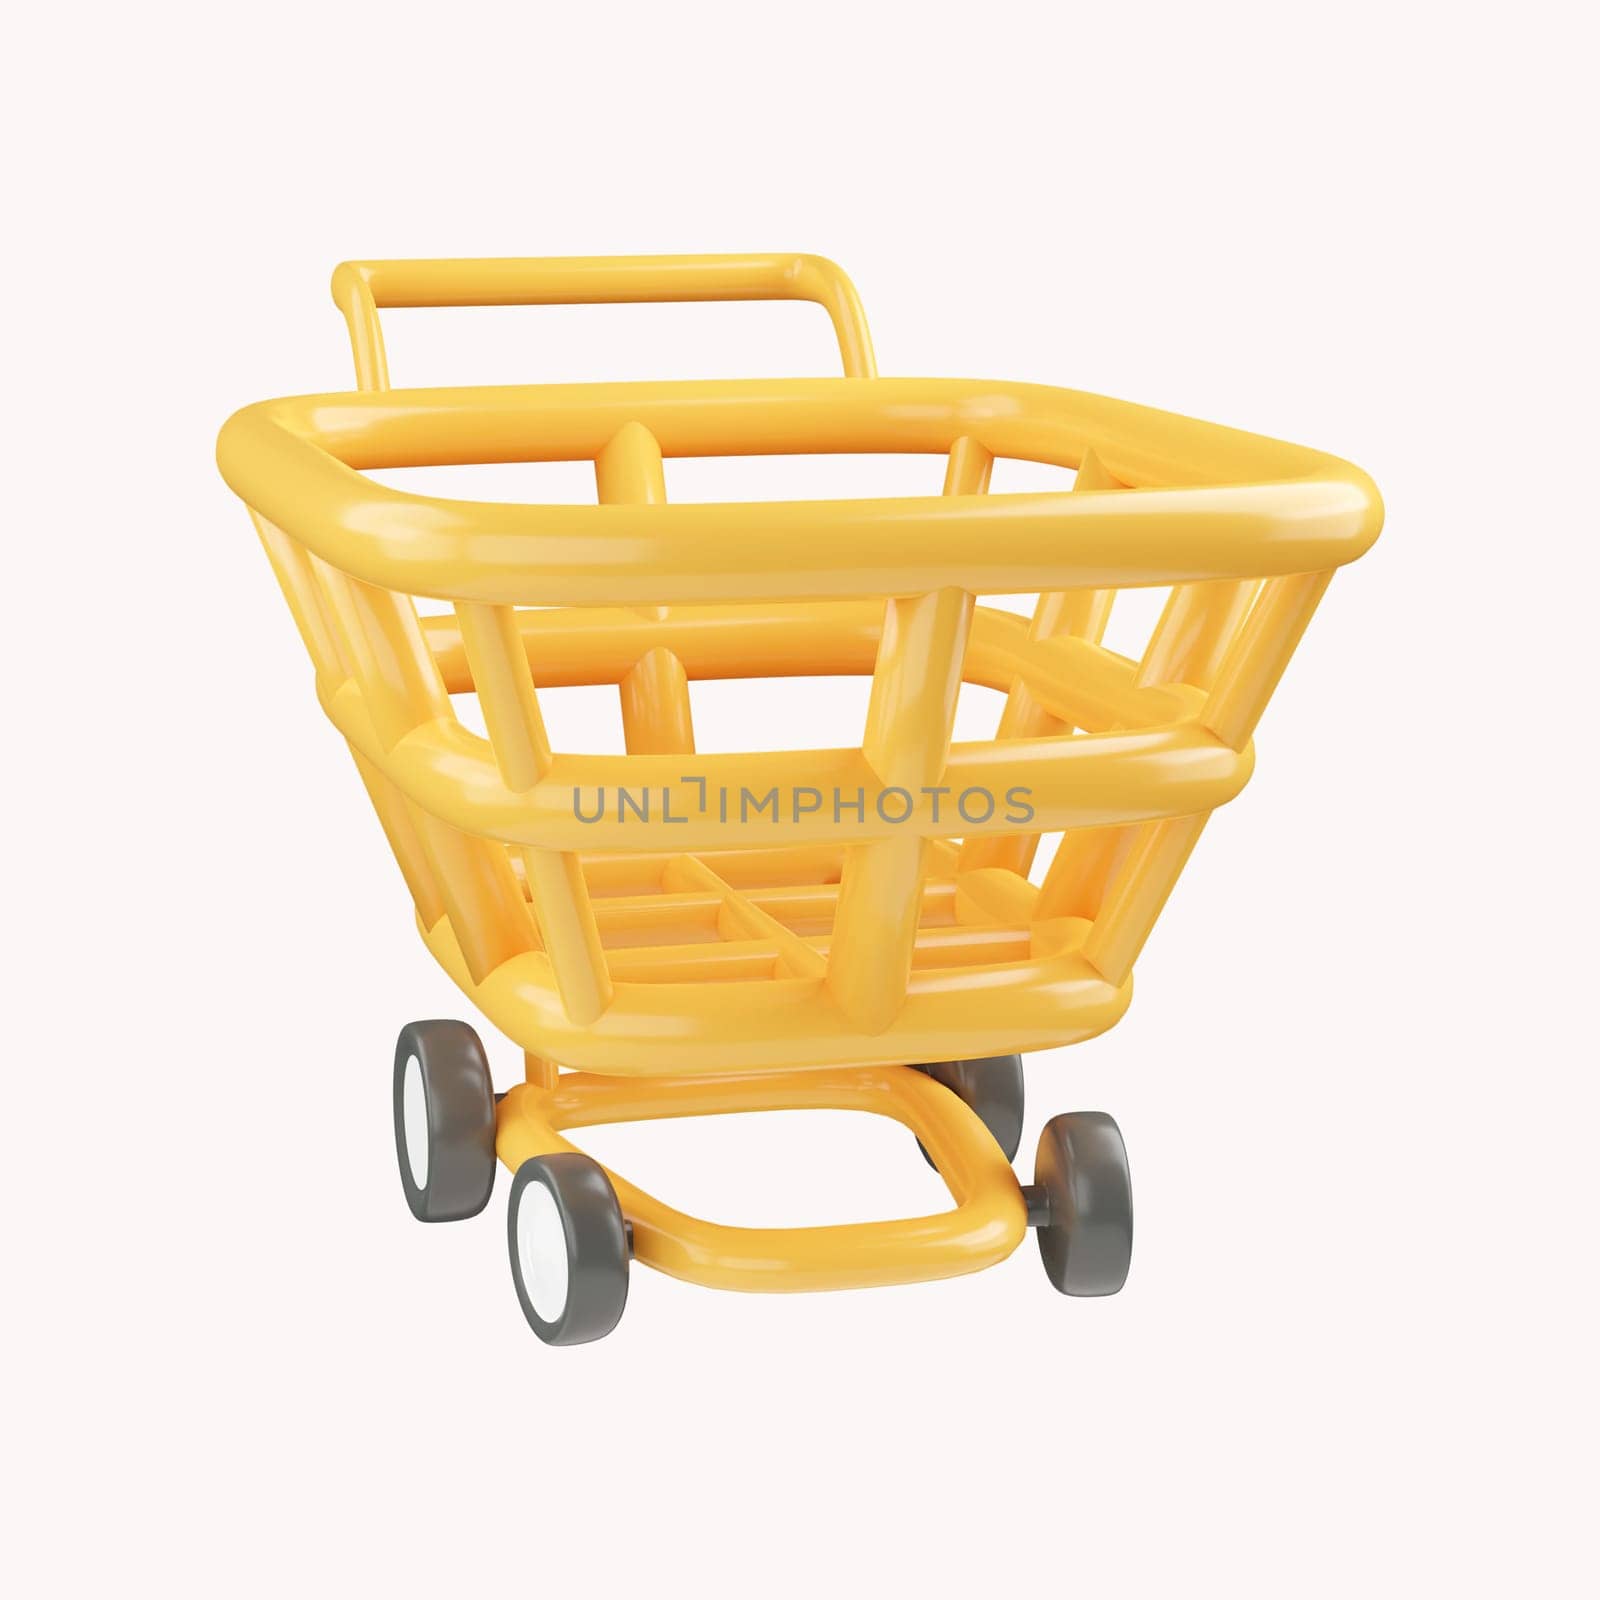 3D yellow shopping cart for online shopping and digital marketing ideas on white isolate background by meepiangraphic